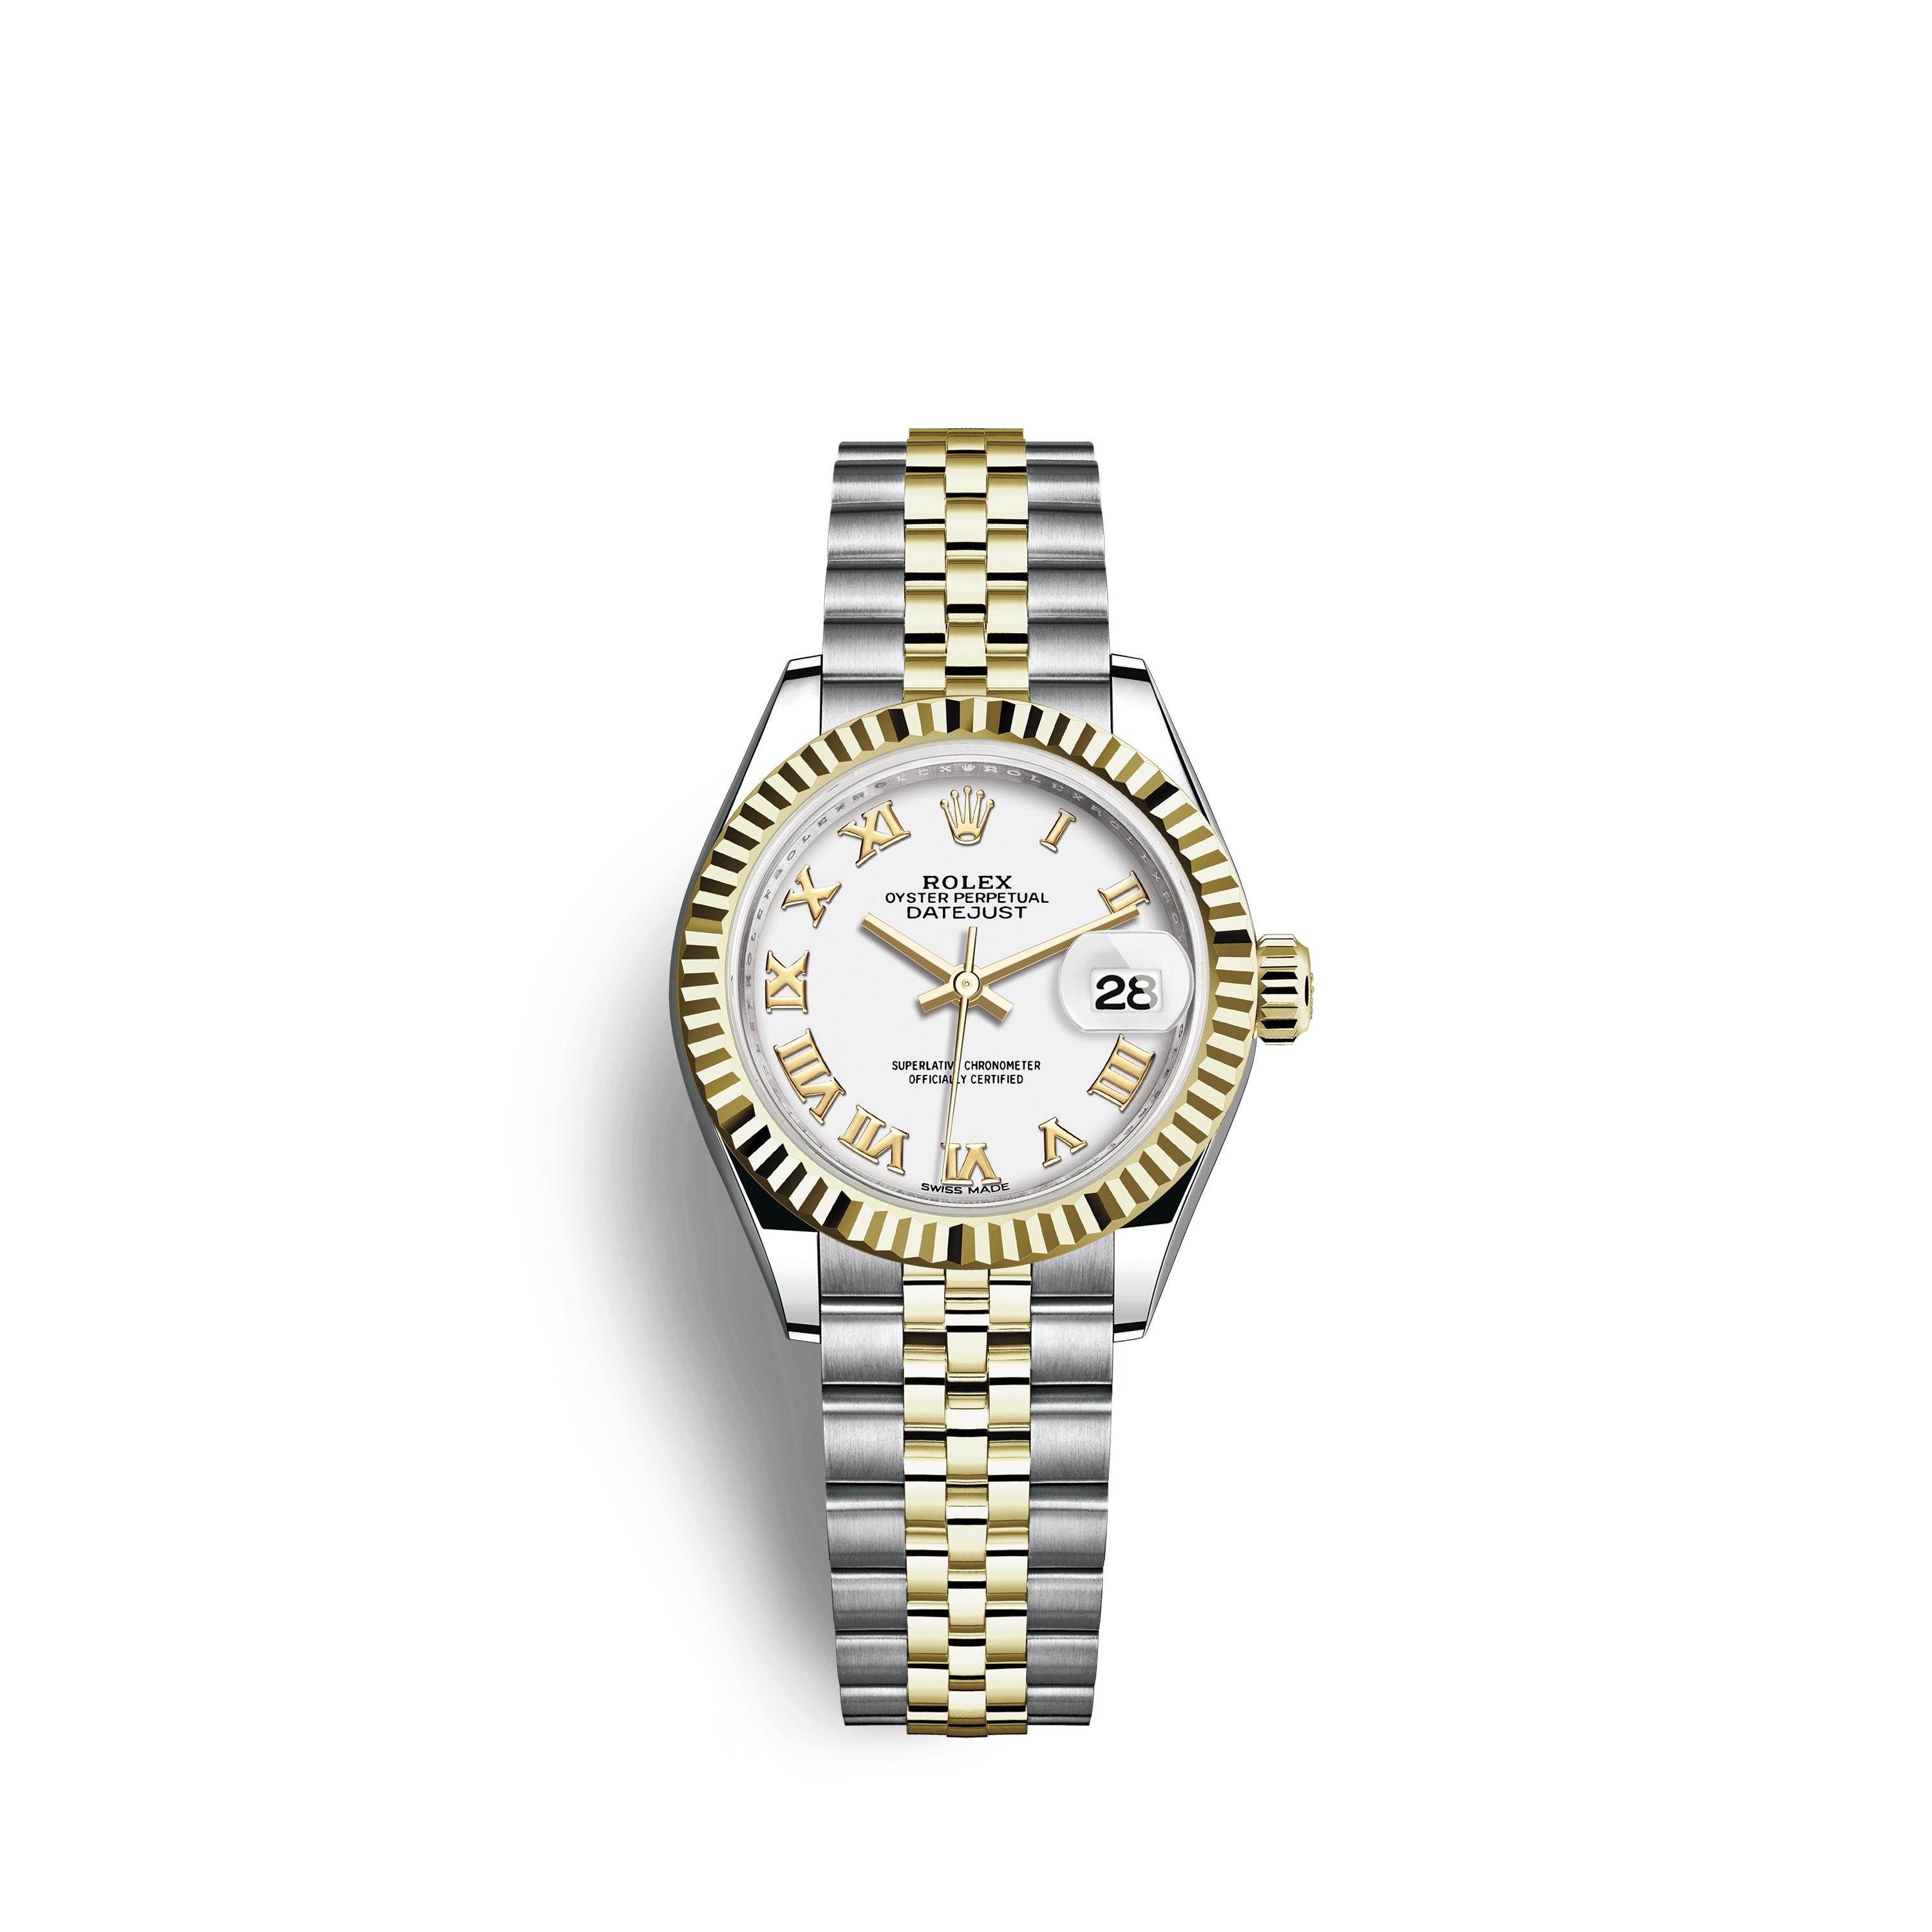 Lady-Datejust 28 279173 Gold & Stainless Steel Watch (White)